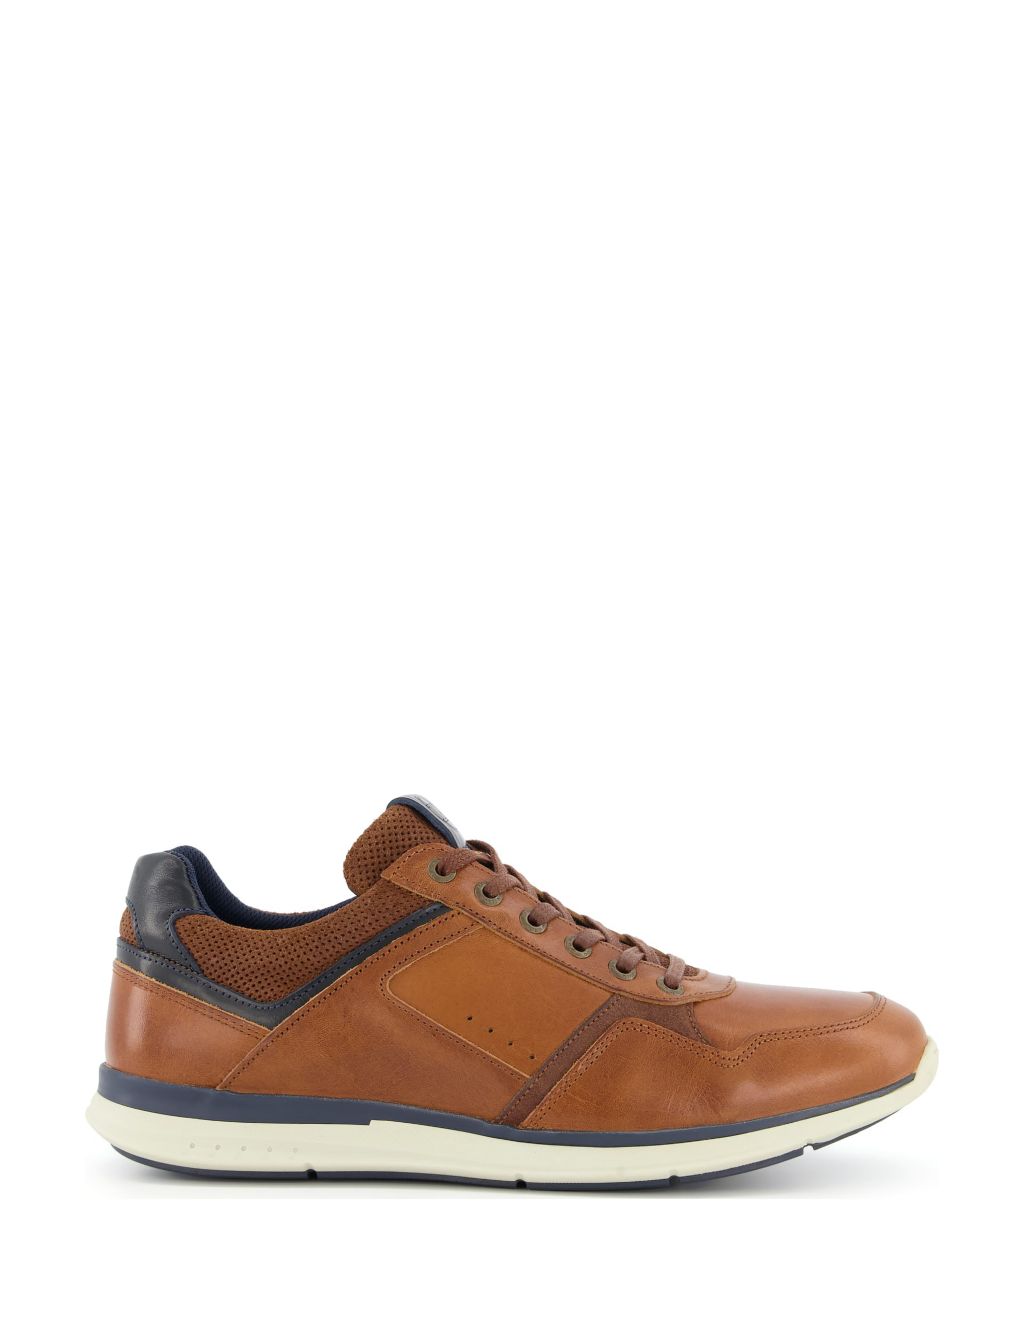 Leather Lace-Up Trainers | Dune London | M&S